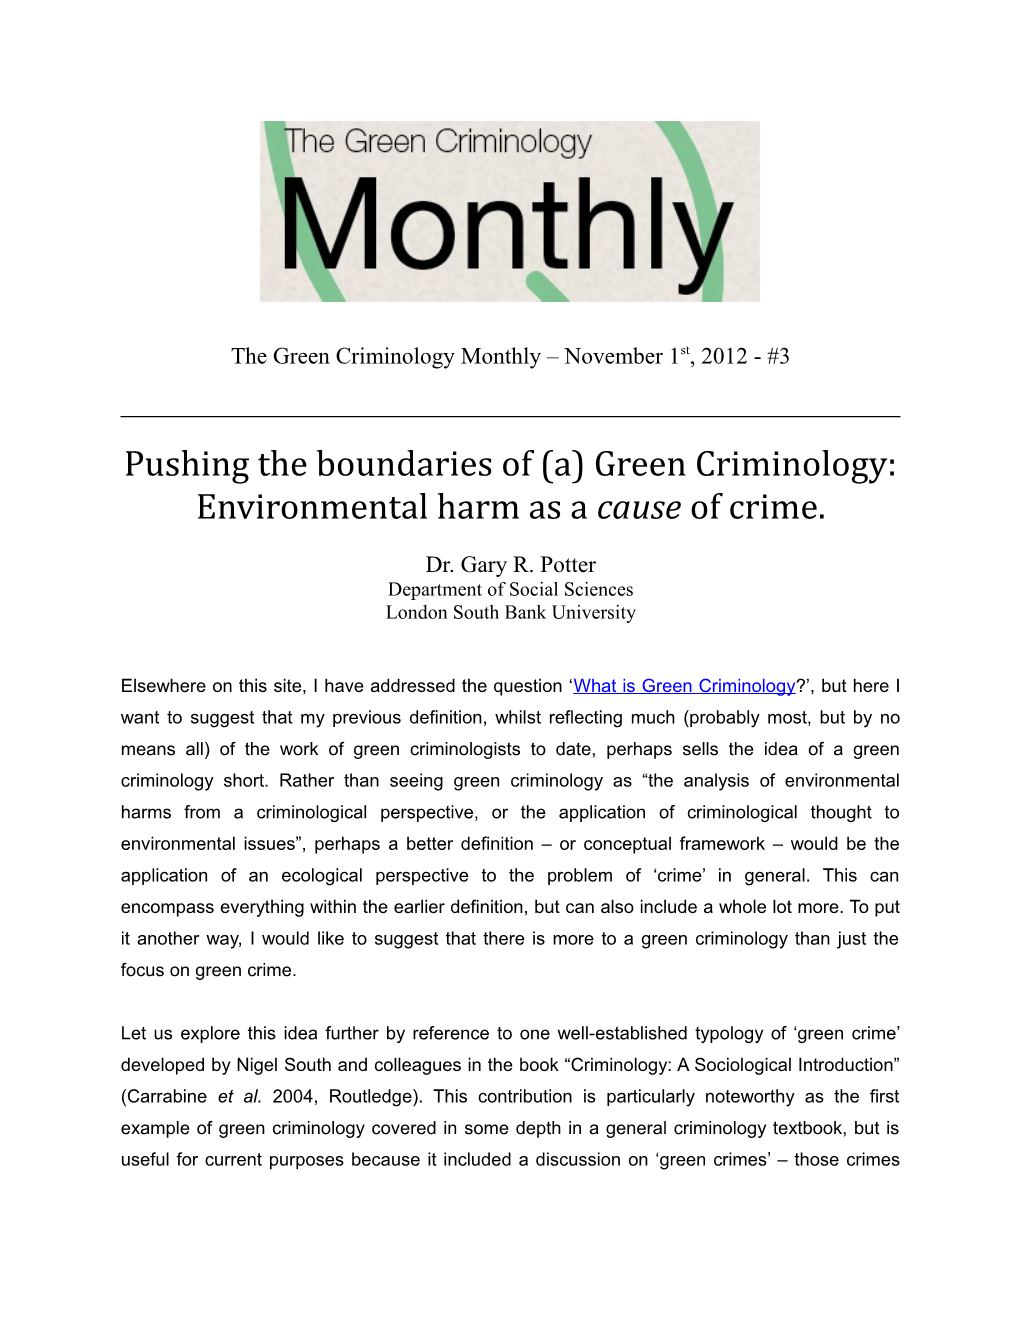 Pushing the Boundaries of (A) Green Criminology